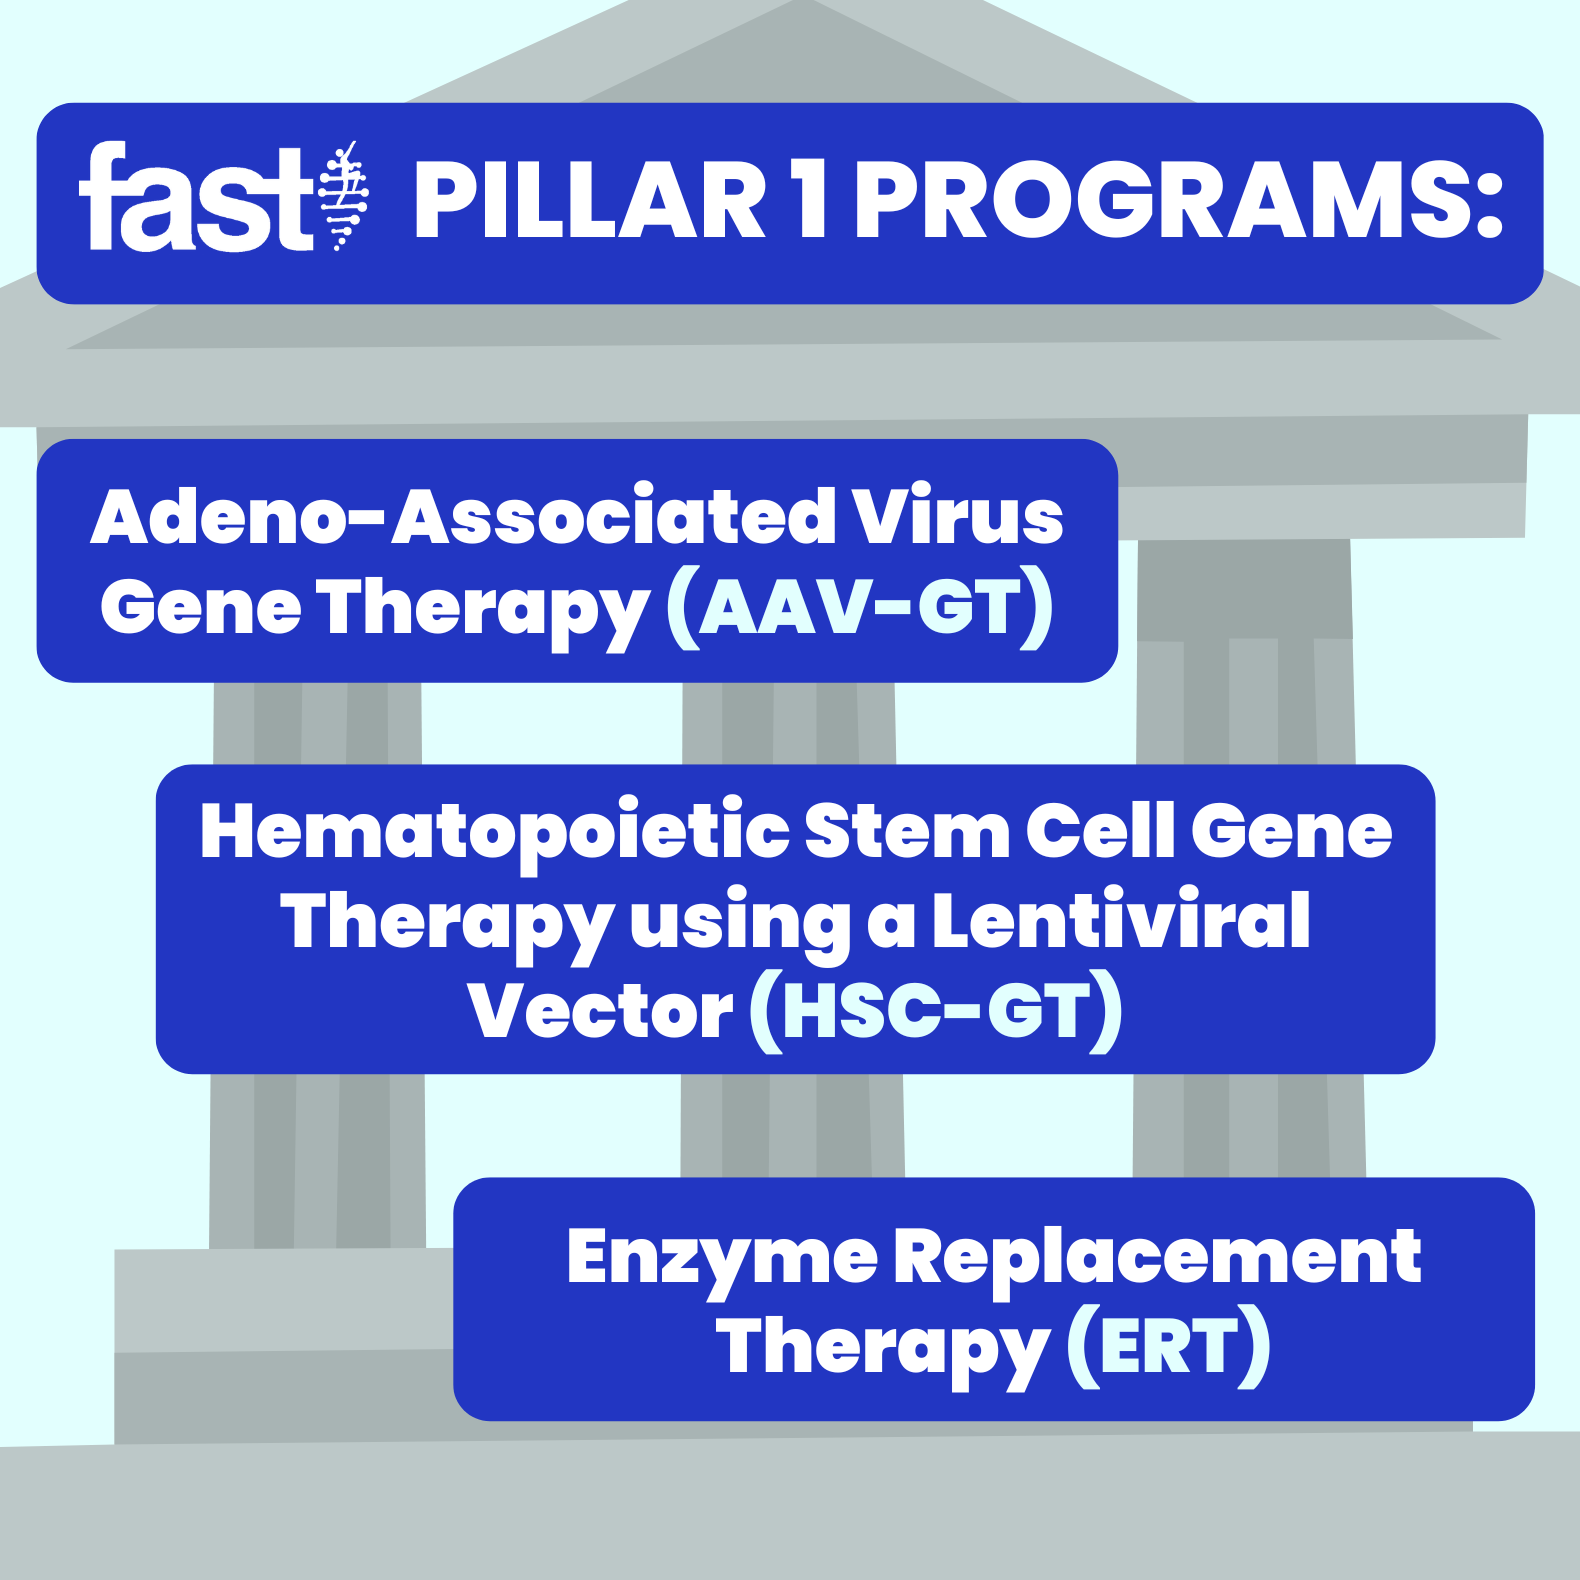 Pillar 1 programs: Adeno-Associated Virus Gene Therapy (AAV-GT), Hematopoietic Stem Cell Gene Therapy using a Lentiviral Vector (HSC-GT), Enzyme Replacement Therapy (ERT)